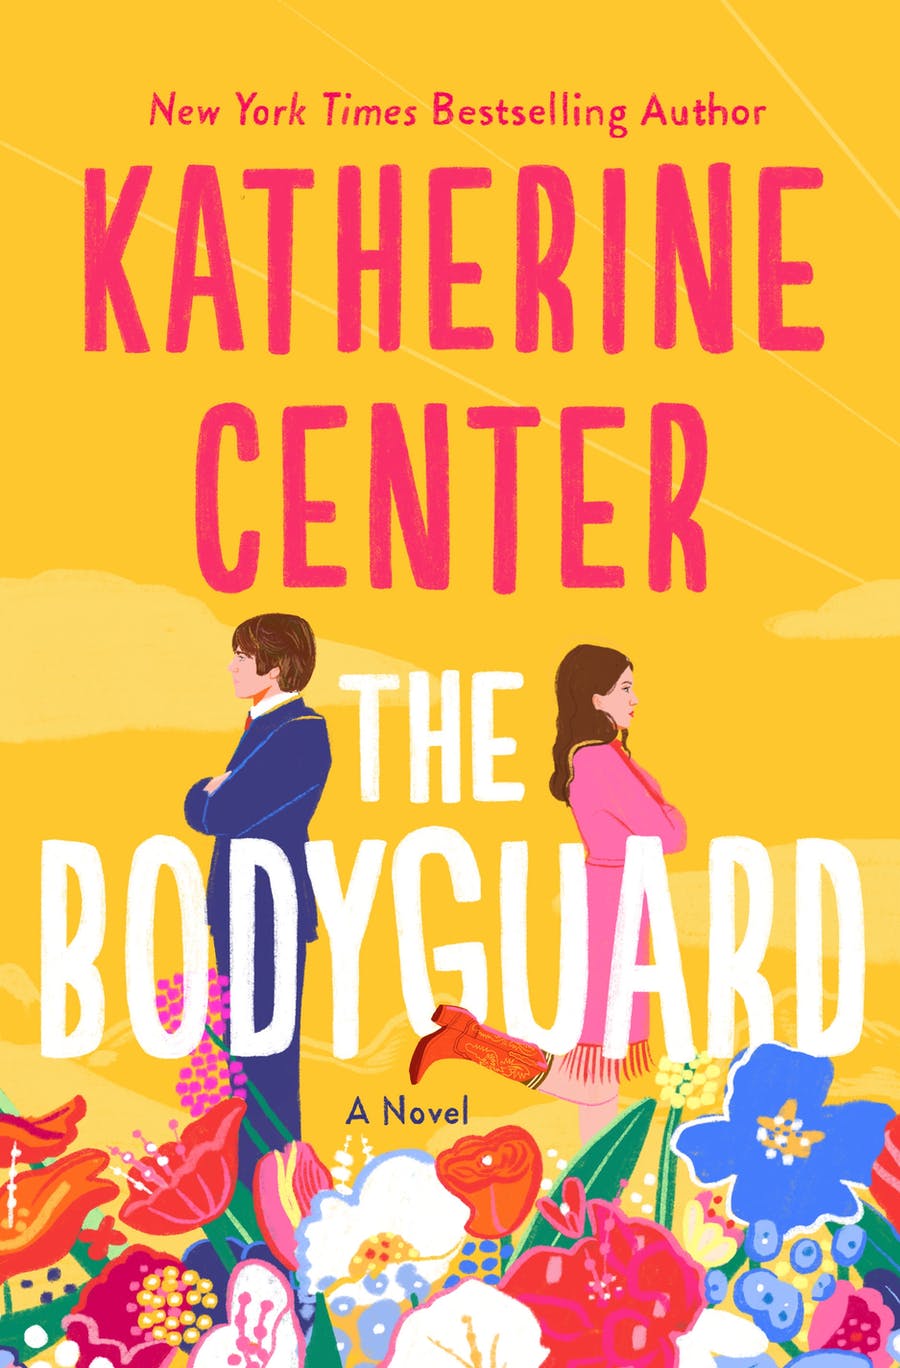 the bodyguard by katherine center book review